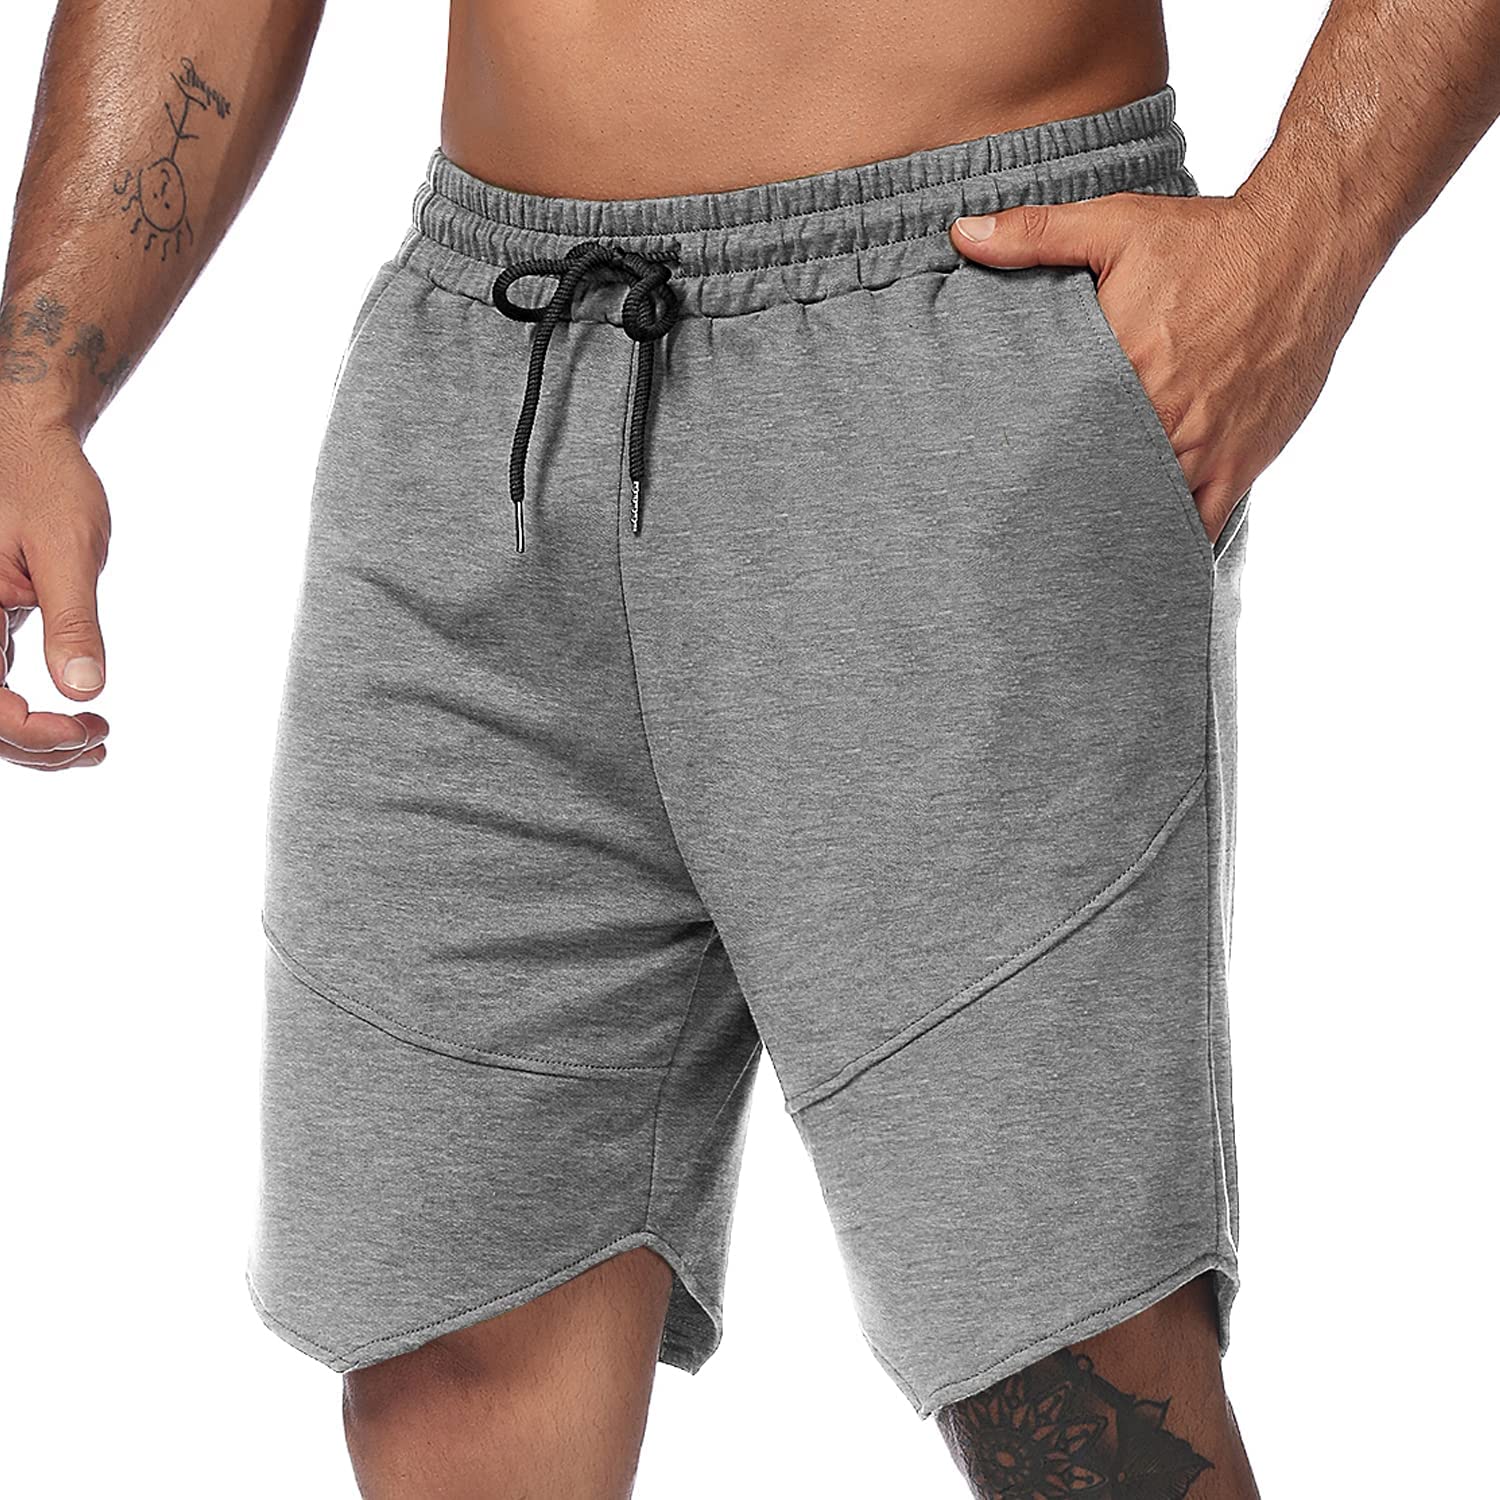 COOFANDY Men's Workout Gym Shorts Weightlifting Bodybuilding Squatting Fitness J